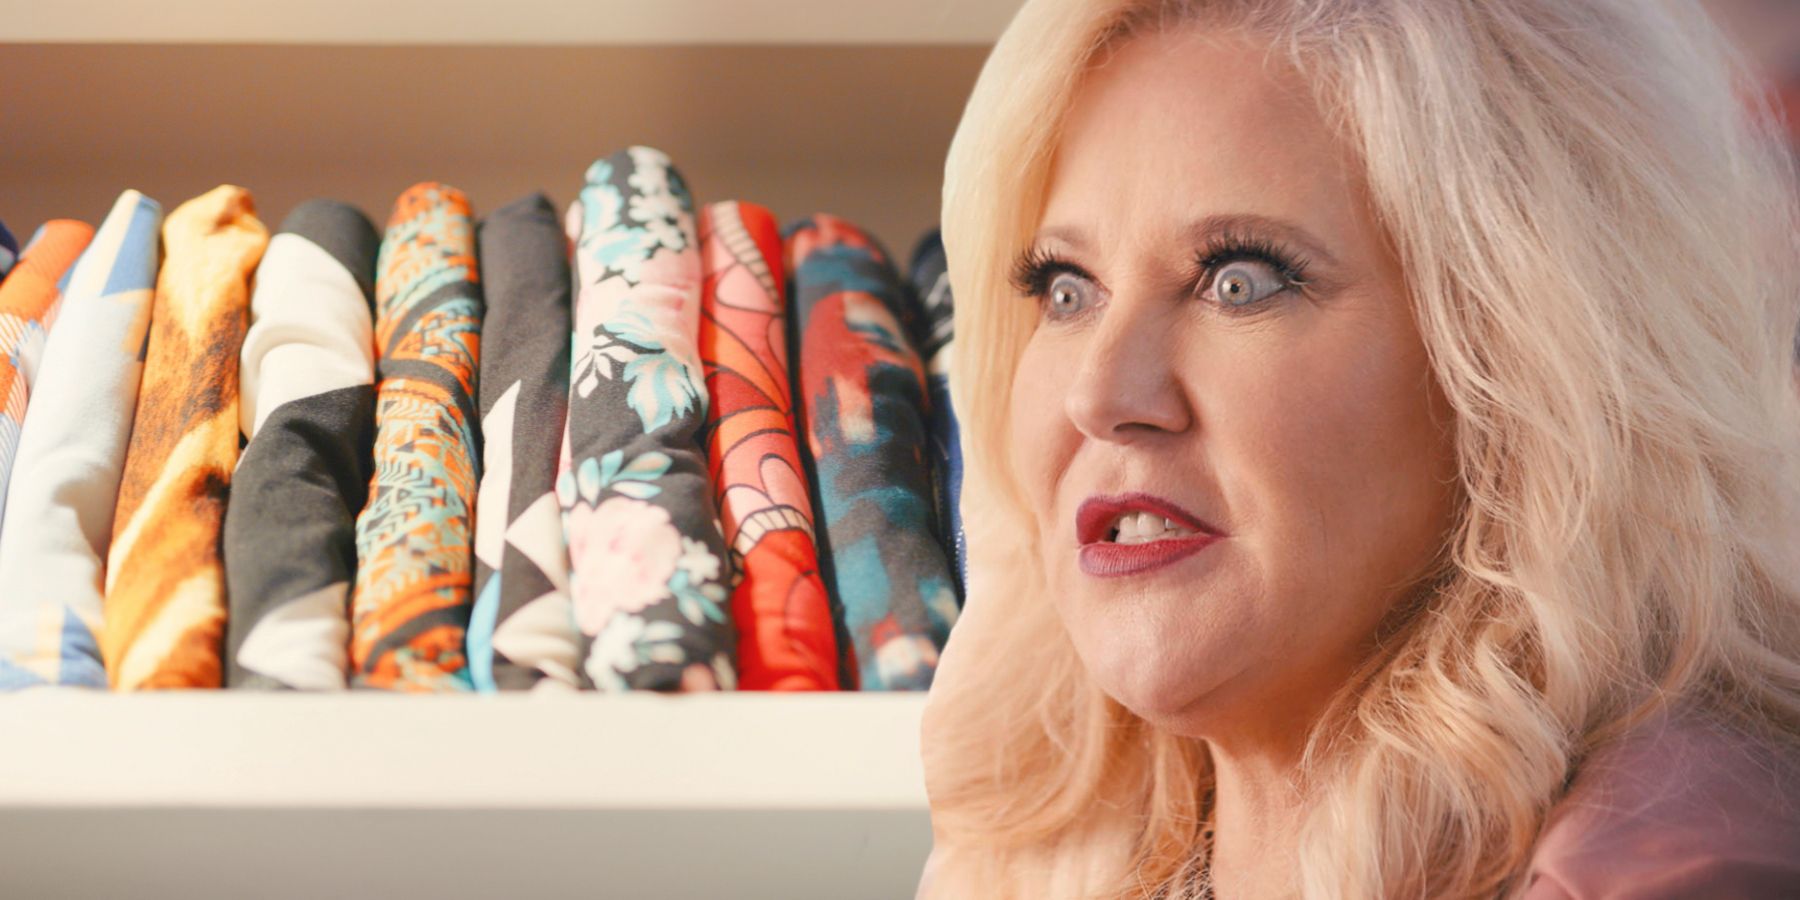 Lularoe's Leggings 'Rip Like Wet Toilet Paper,' And Now They're